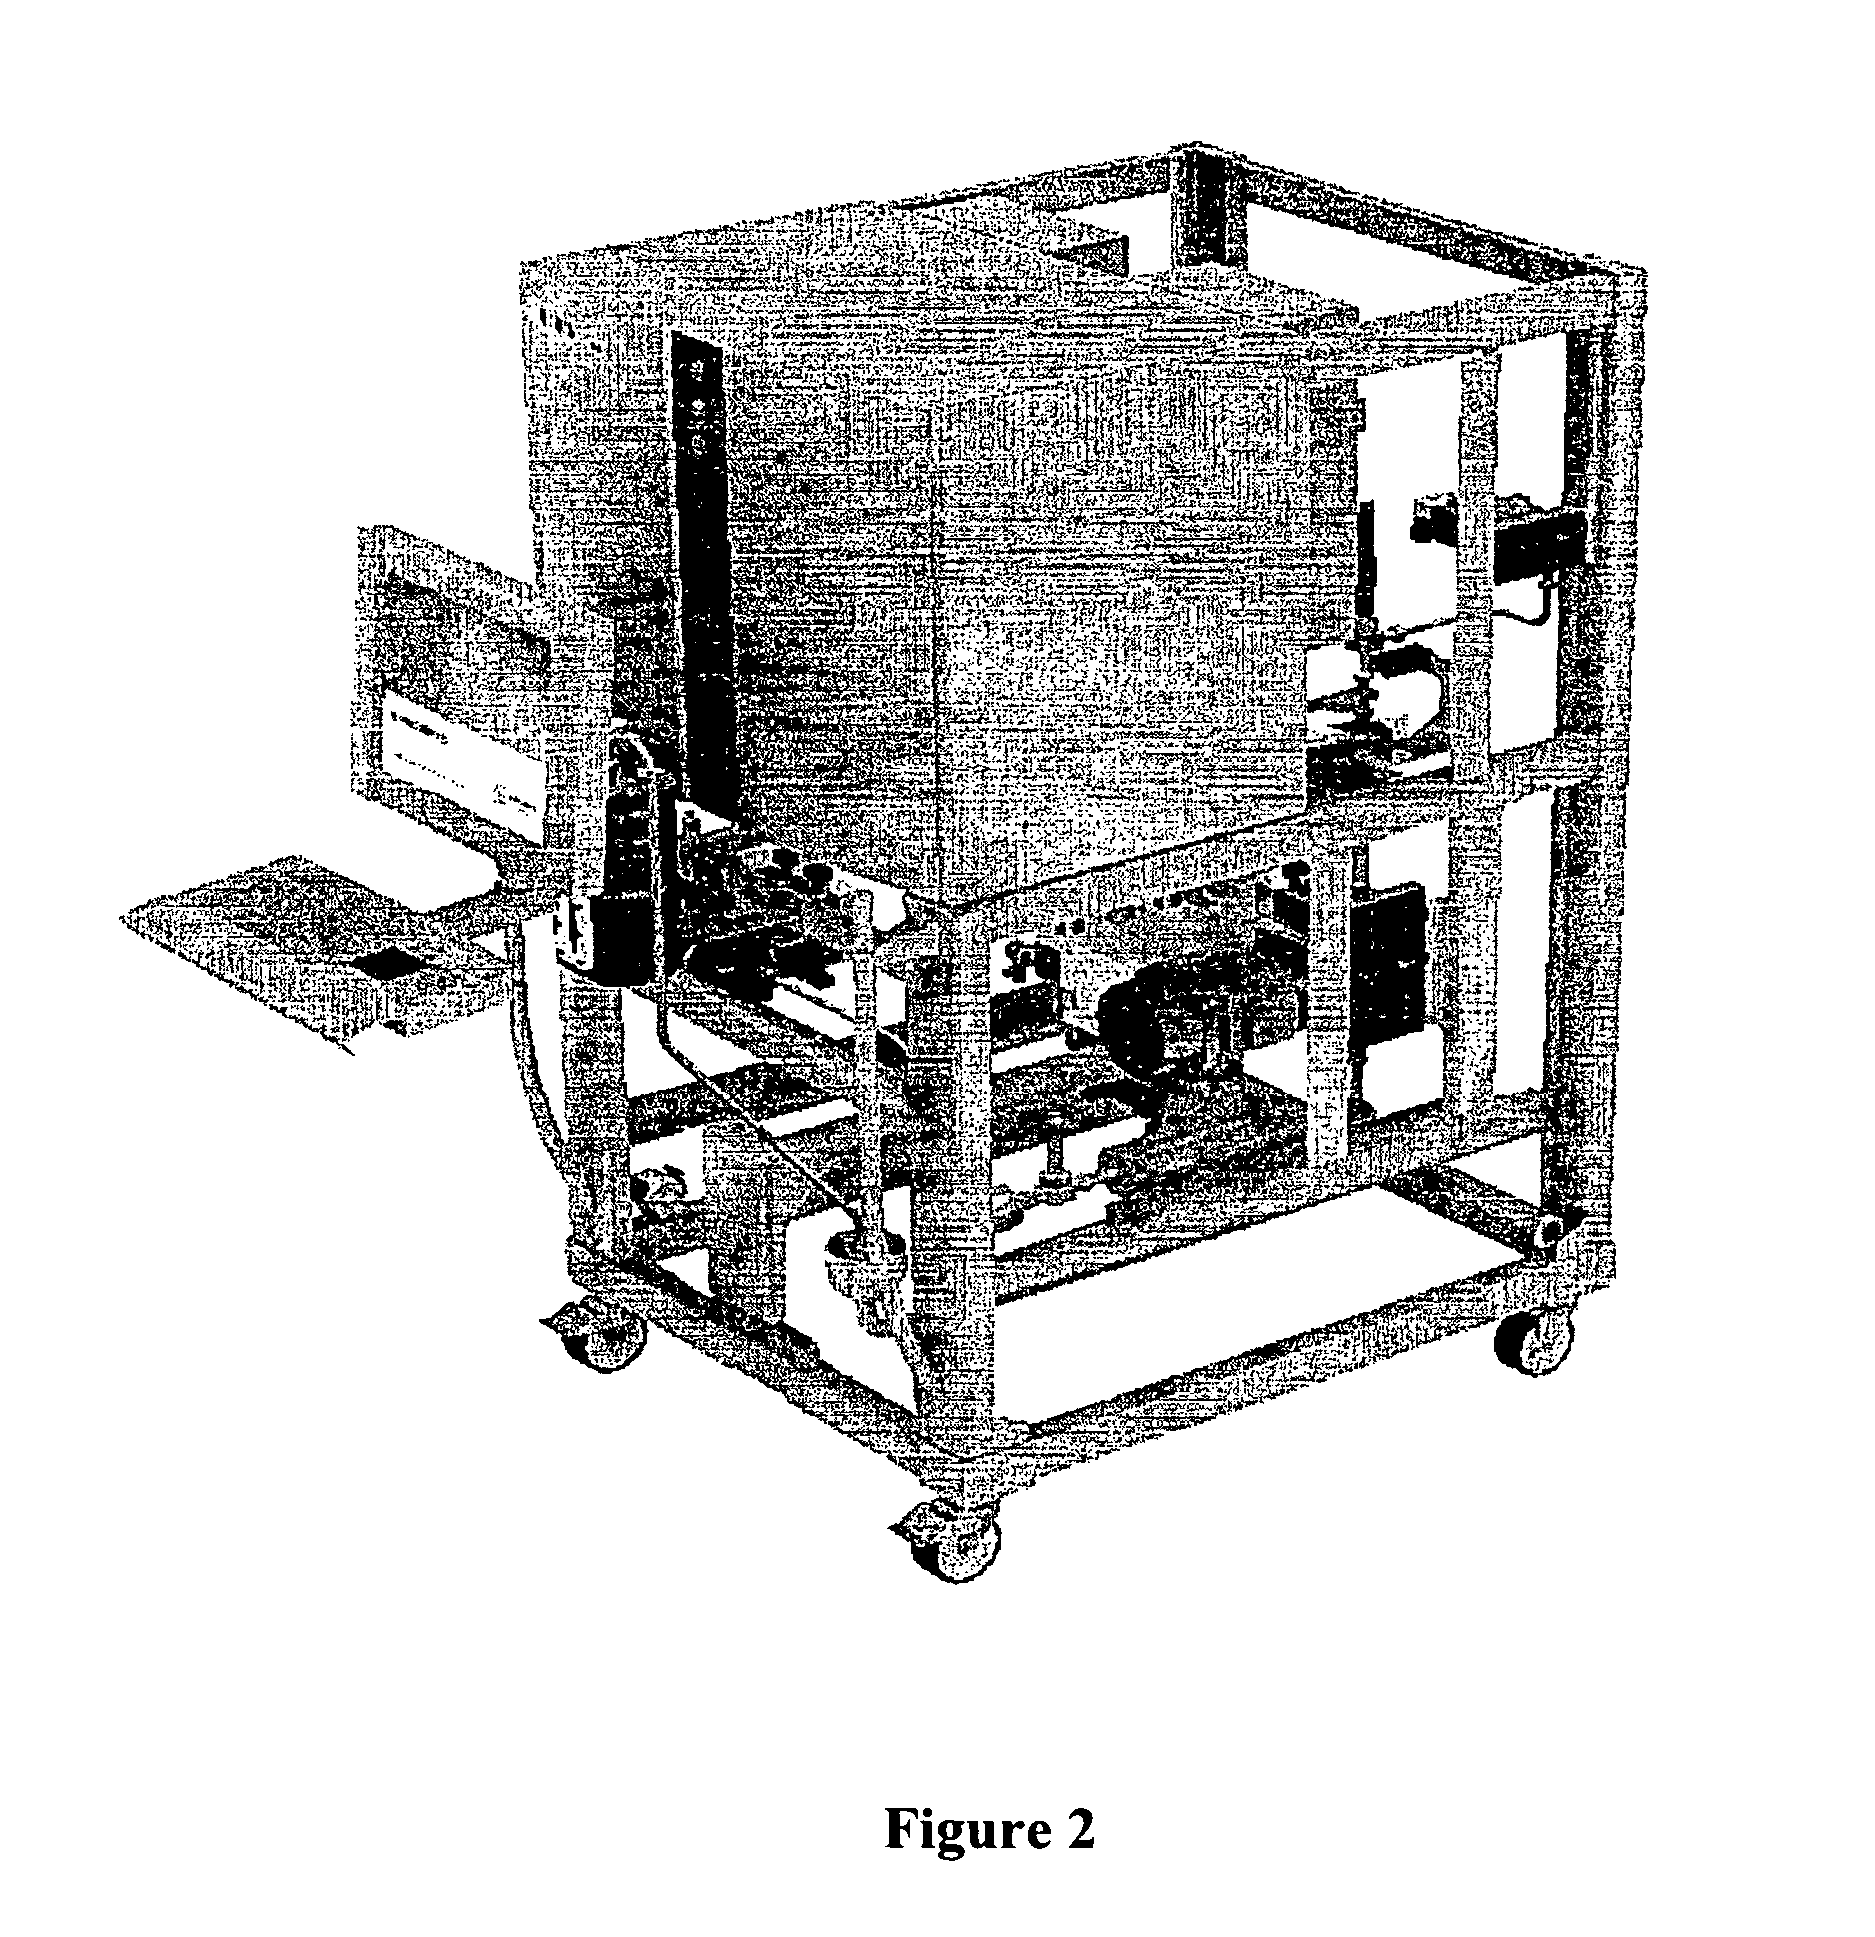 System for configuring a chemical separation system